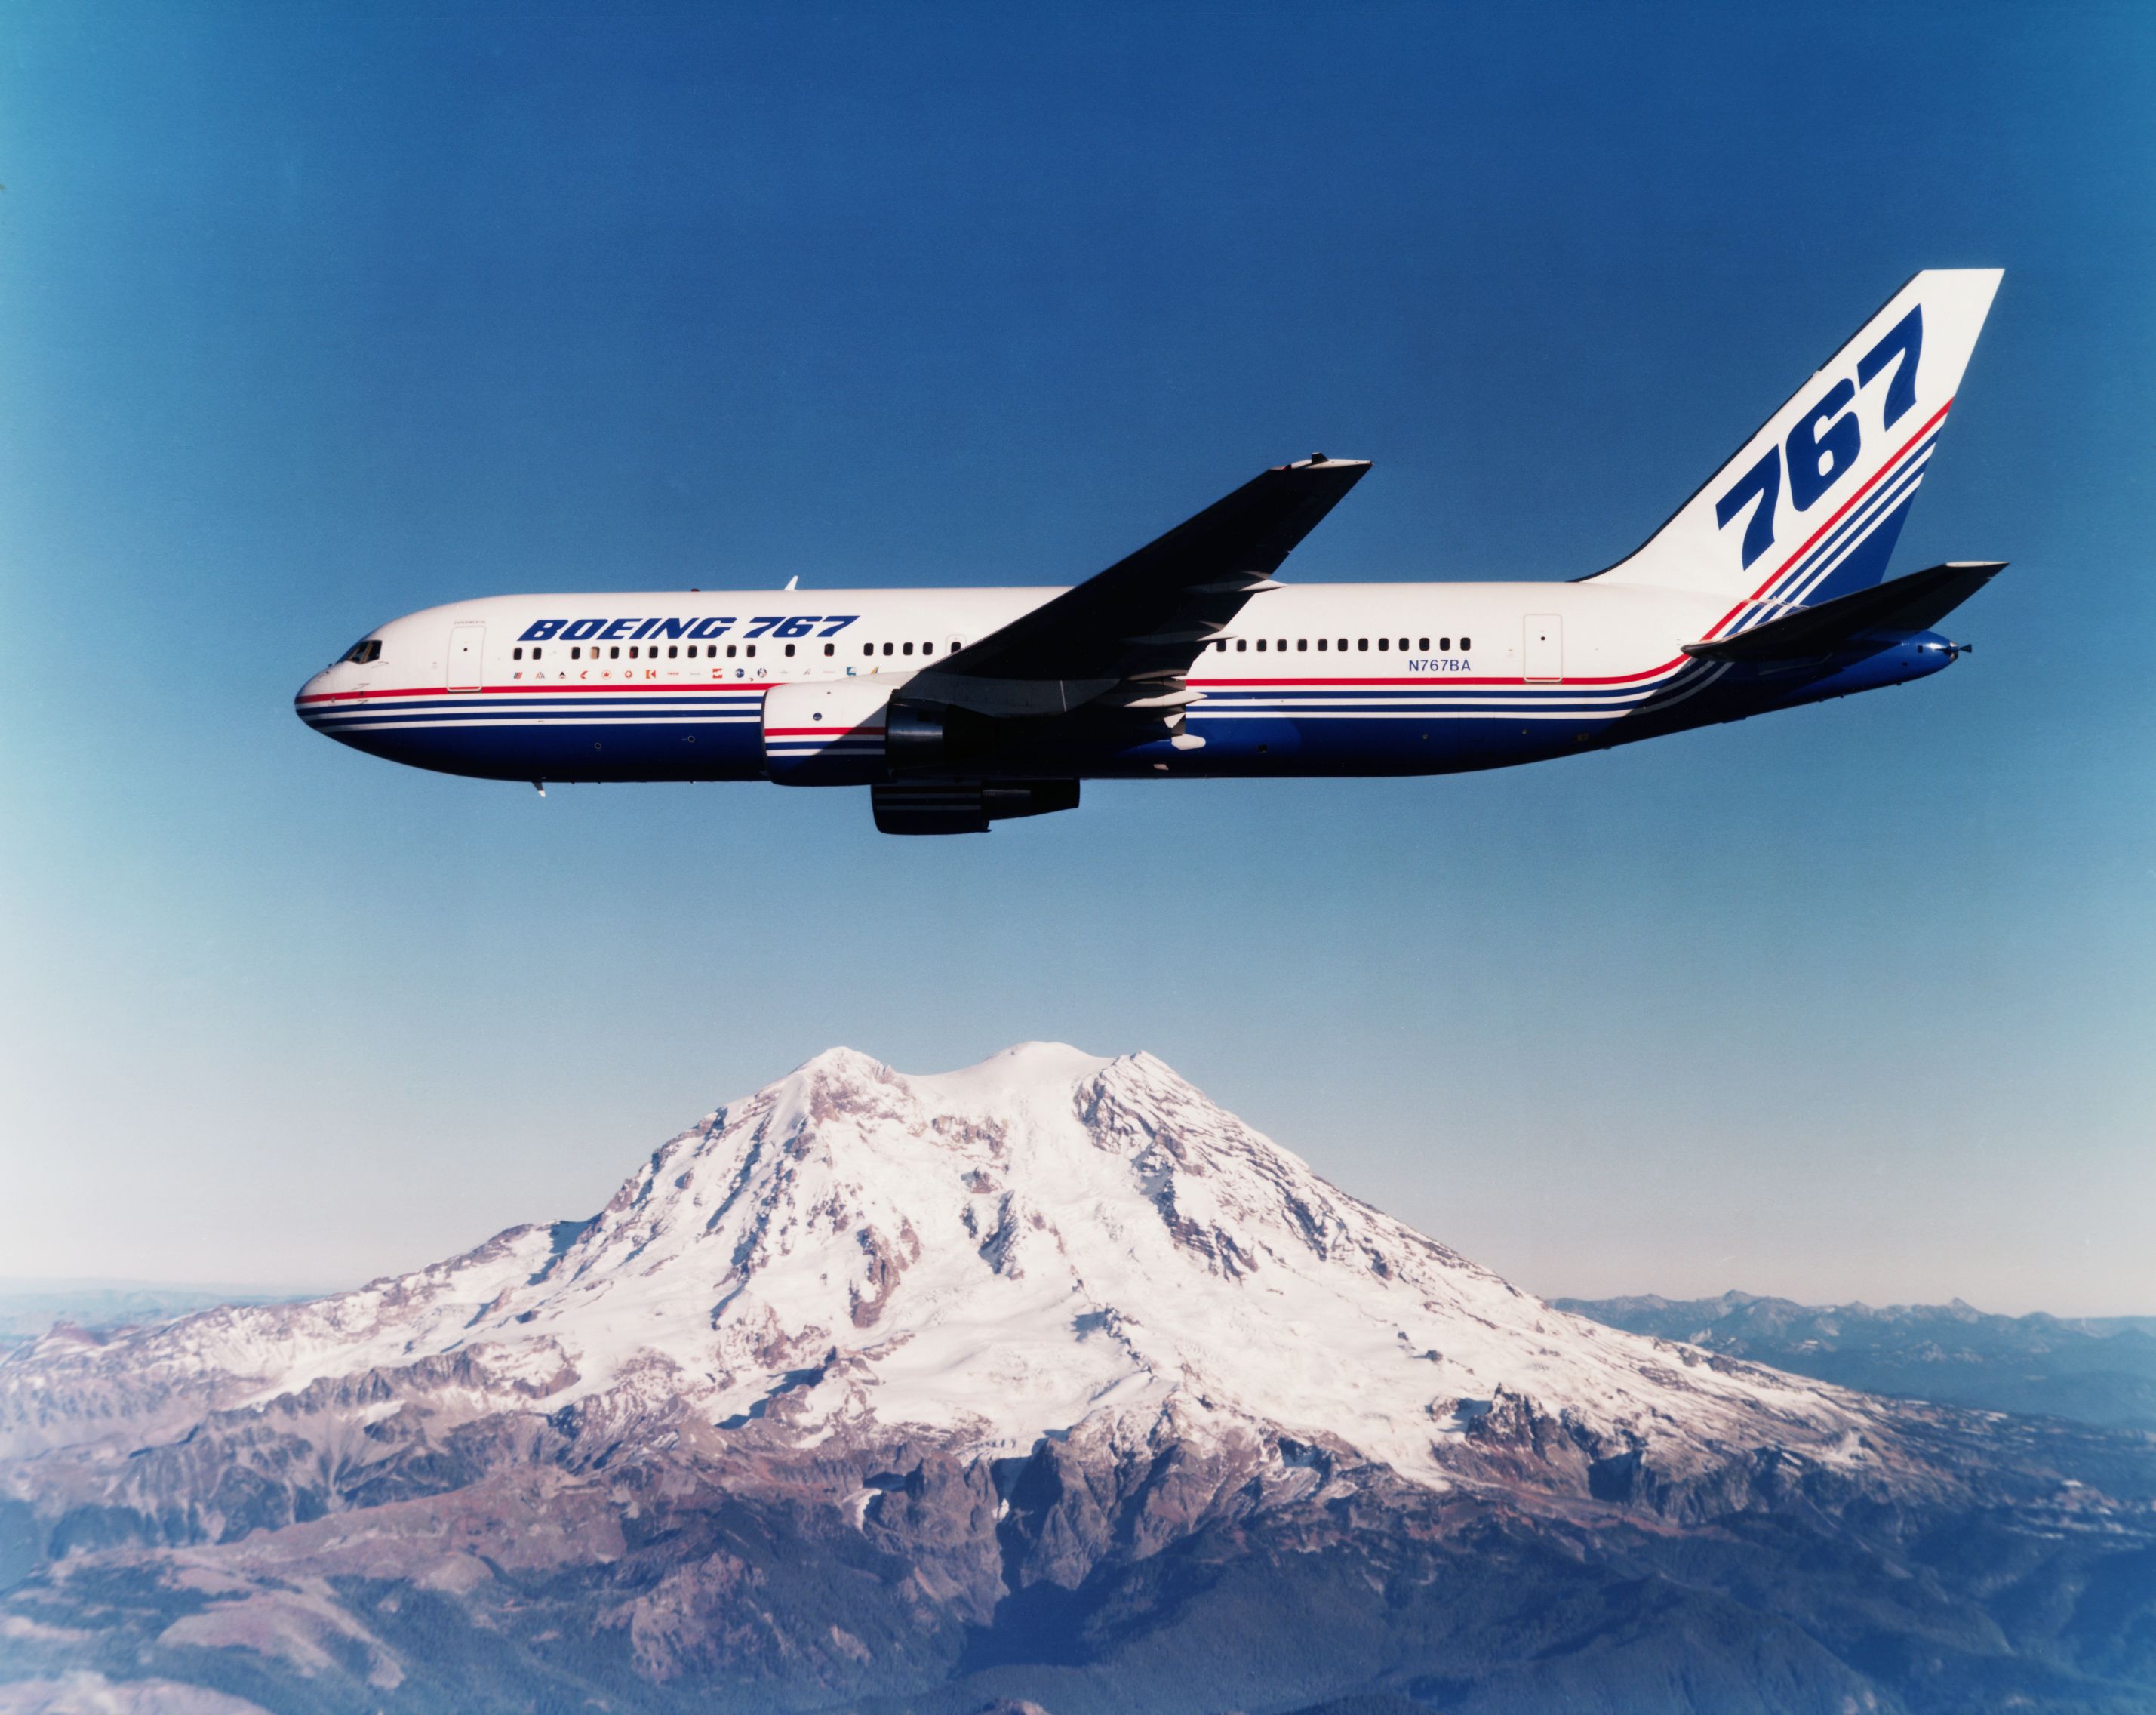 Boeing 767 in air over mountain